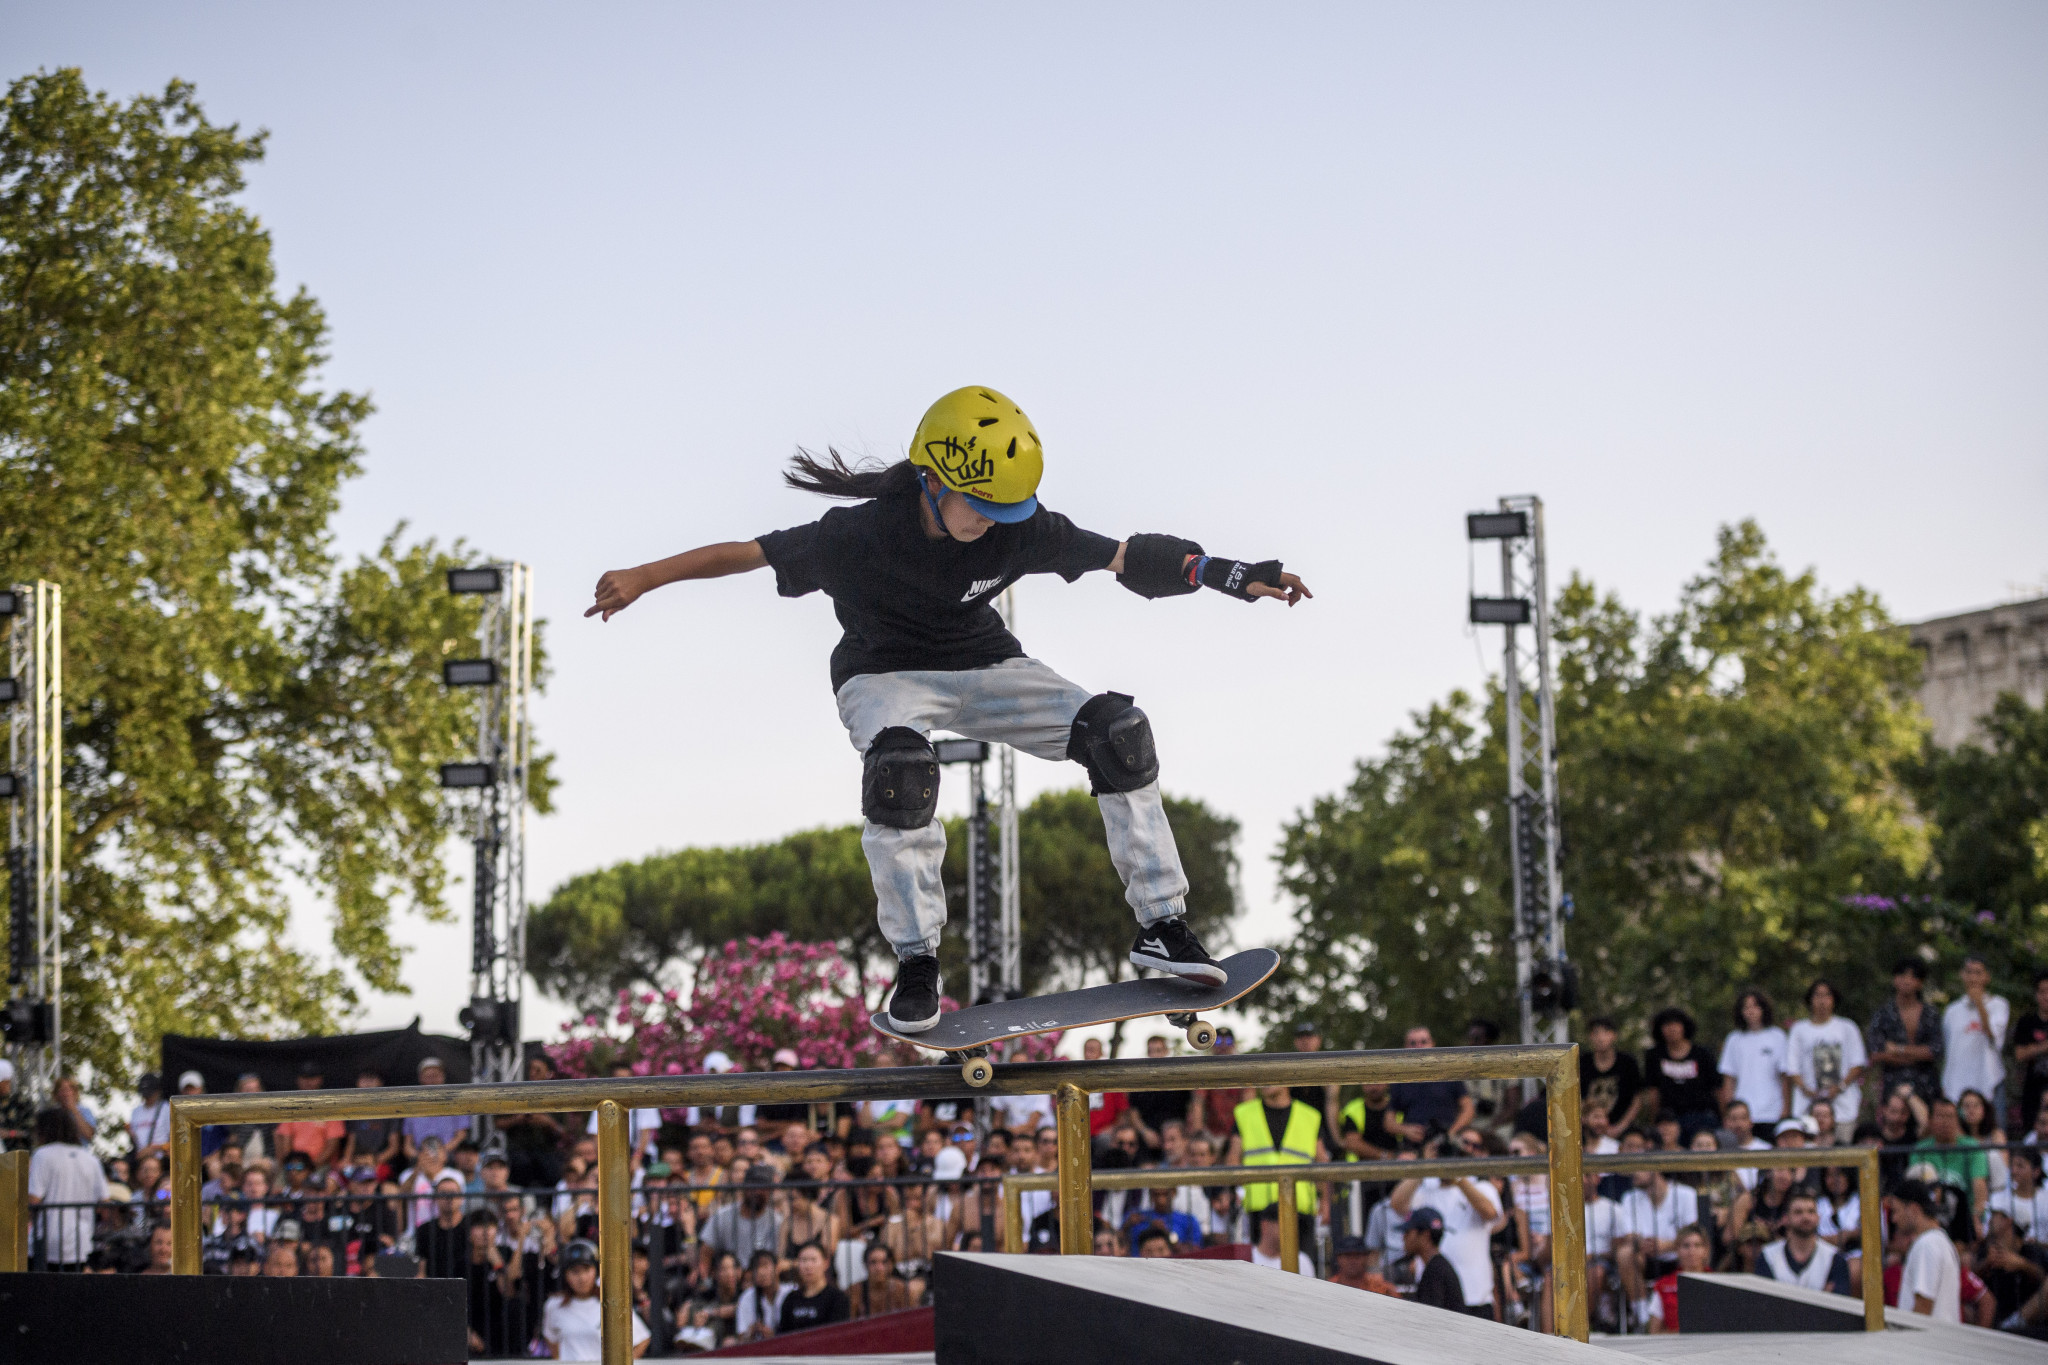 The Street Skateboarding Rome Pro Tour is the only Paris 2024 qualifying event to have taken place so far in the sport ©Getty Images